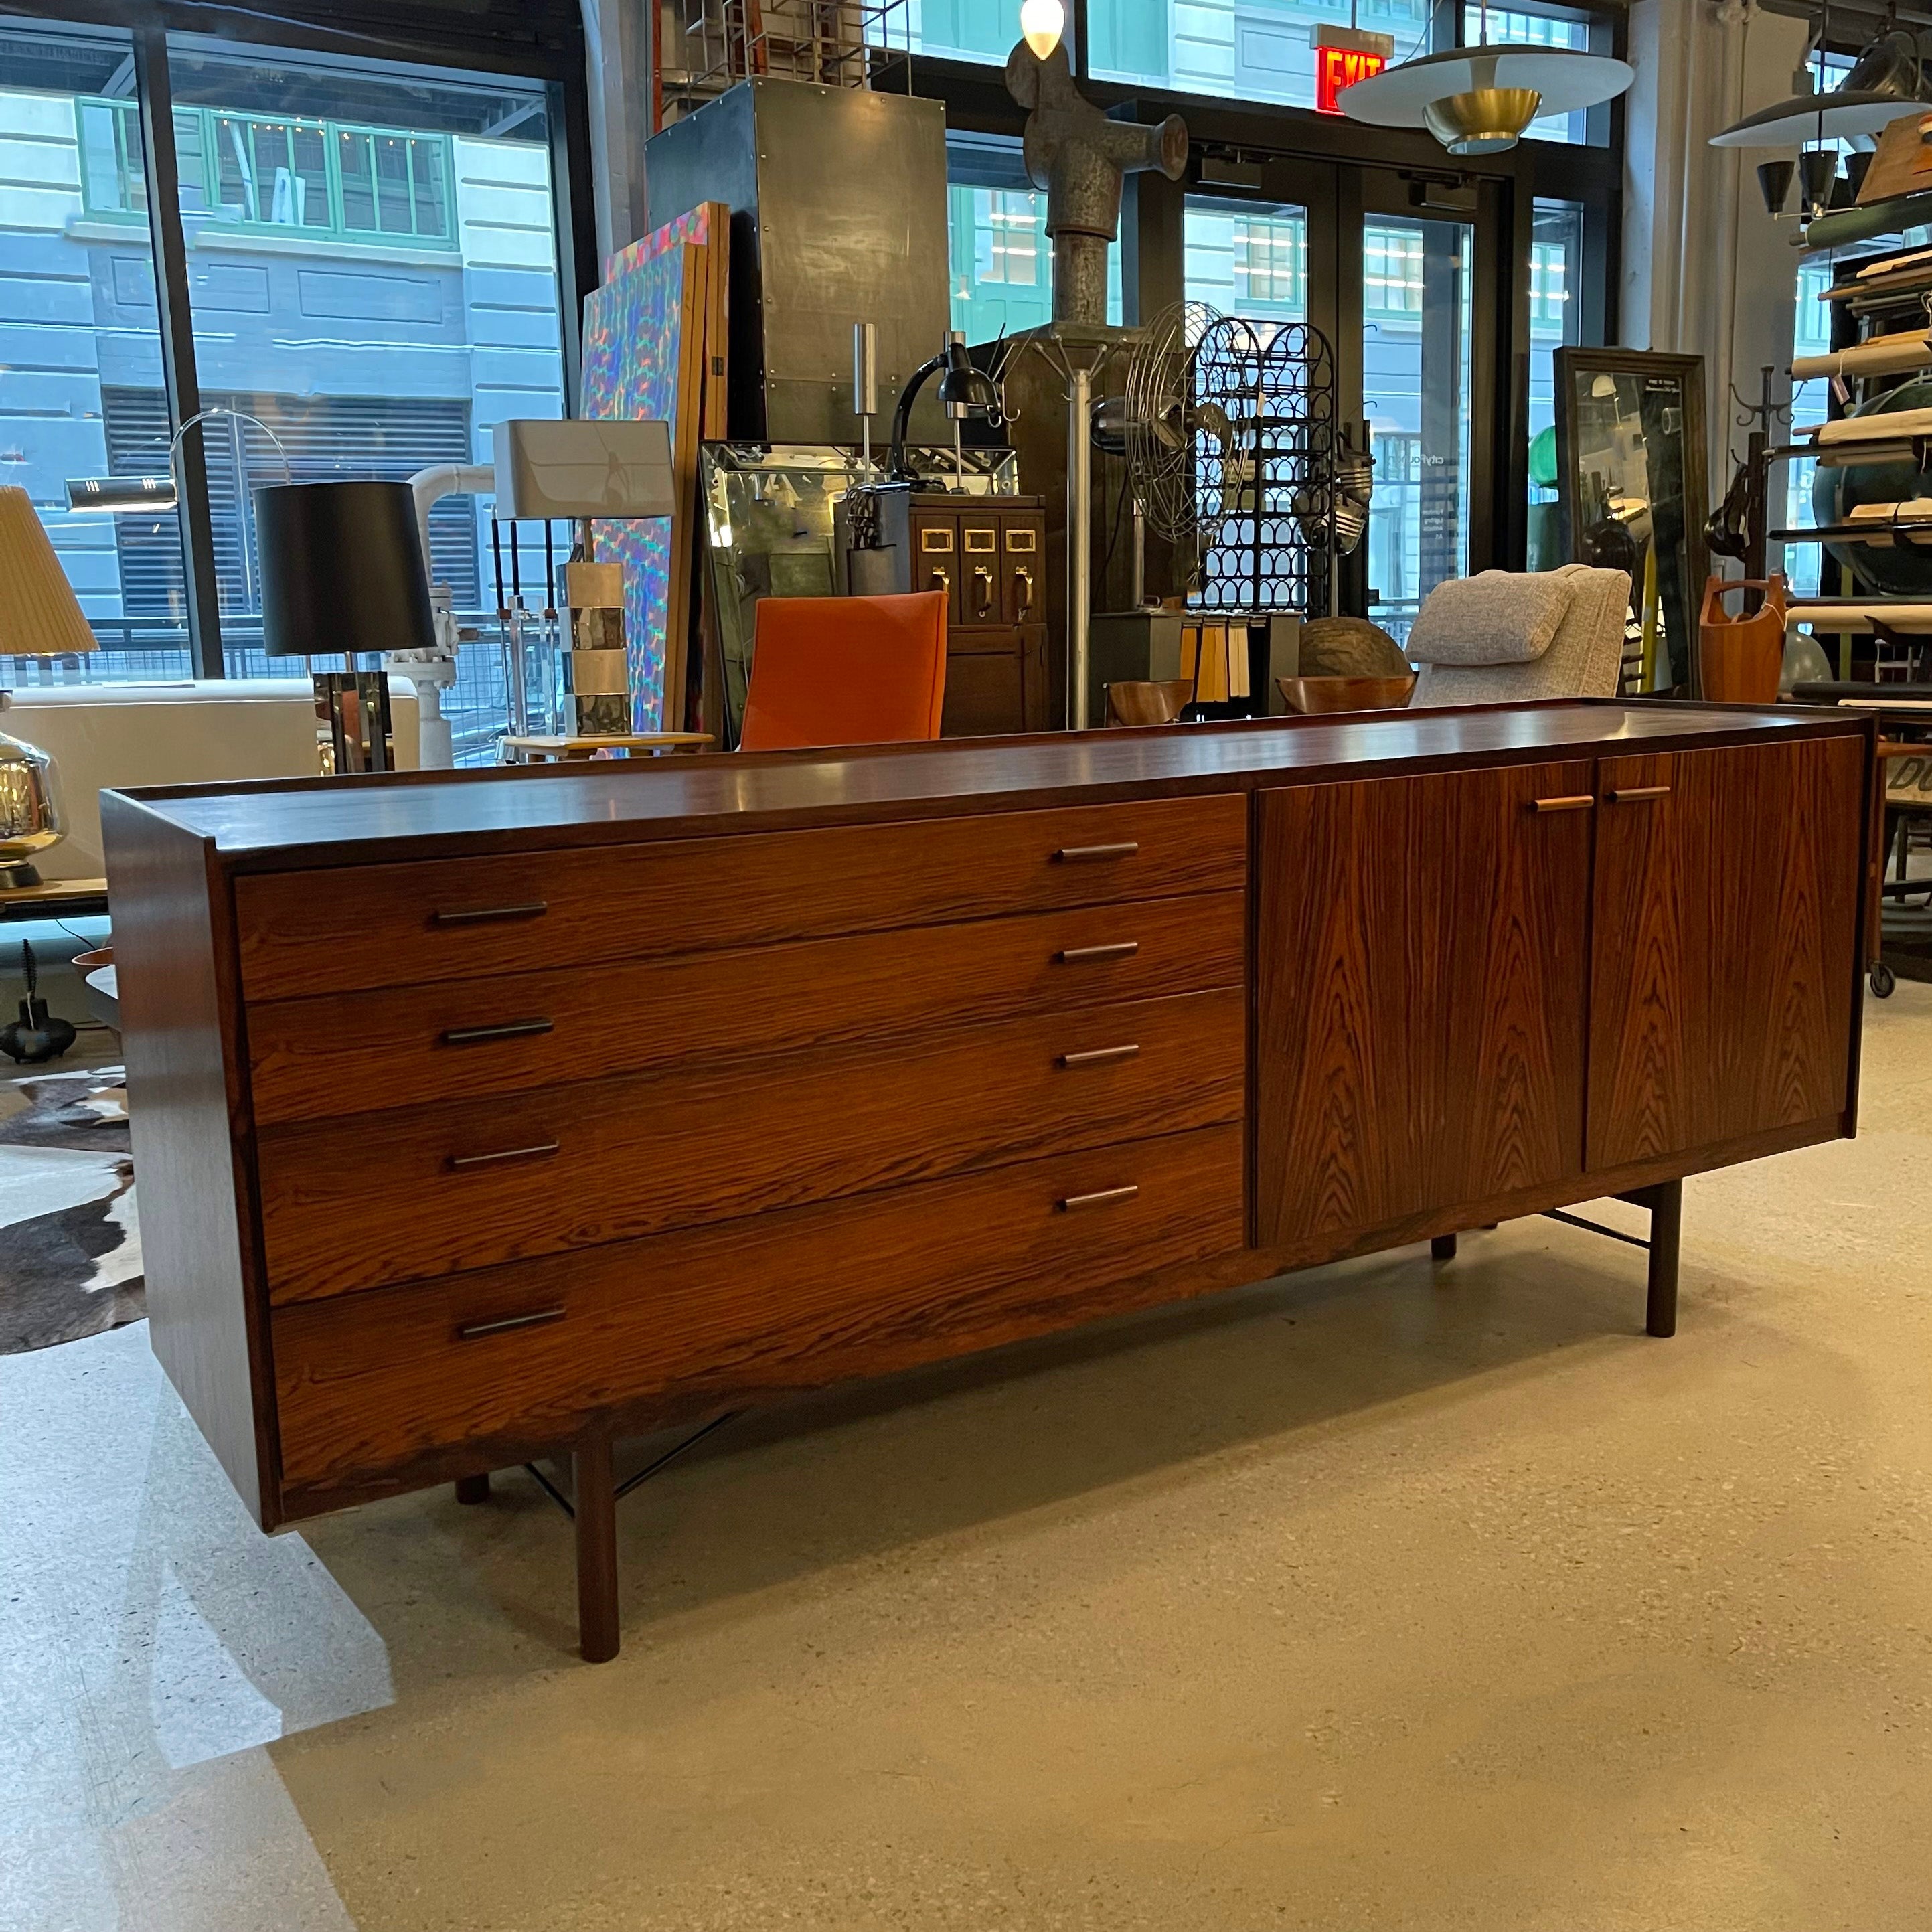 Mid-century, Danish modern, rosewood credenza sideboard features a rich tone and wonderful grain throughout with streamilned, linear pulls. It offers a great deal of storage with 4 drawers on one side and pull-out and stationary shelves on the